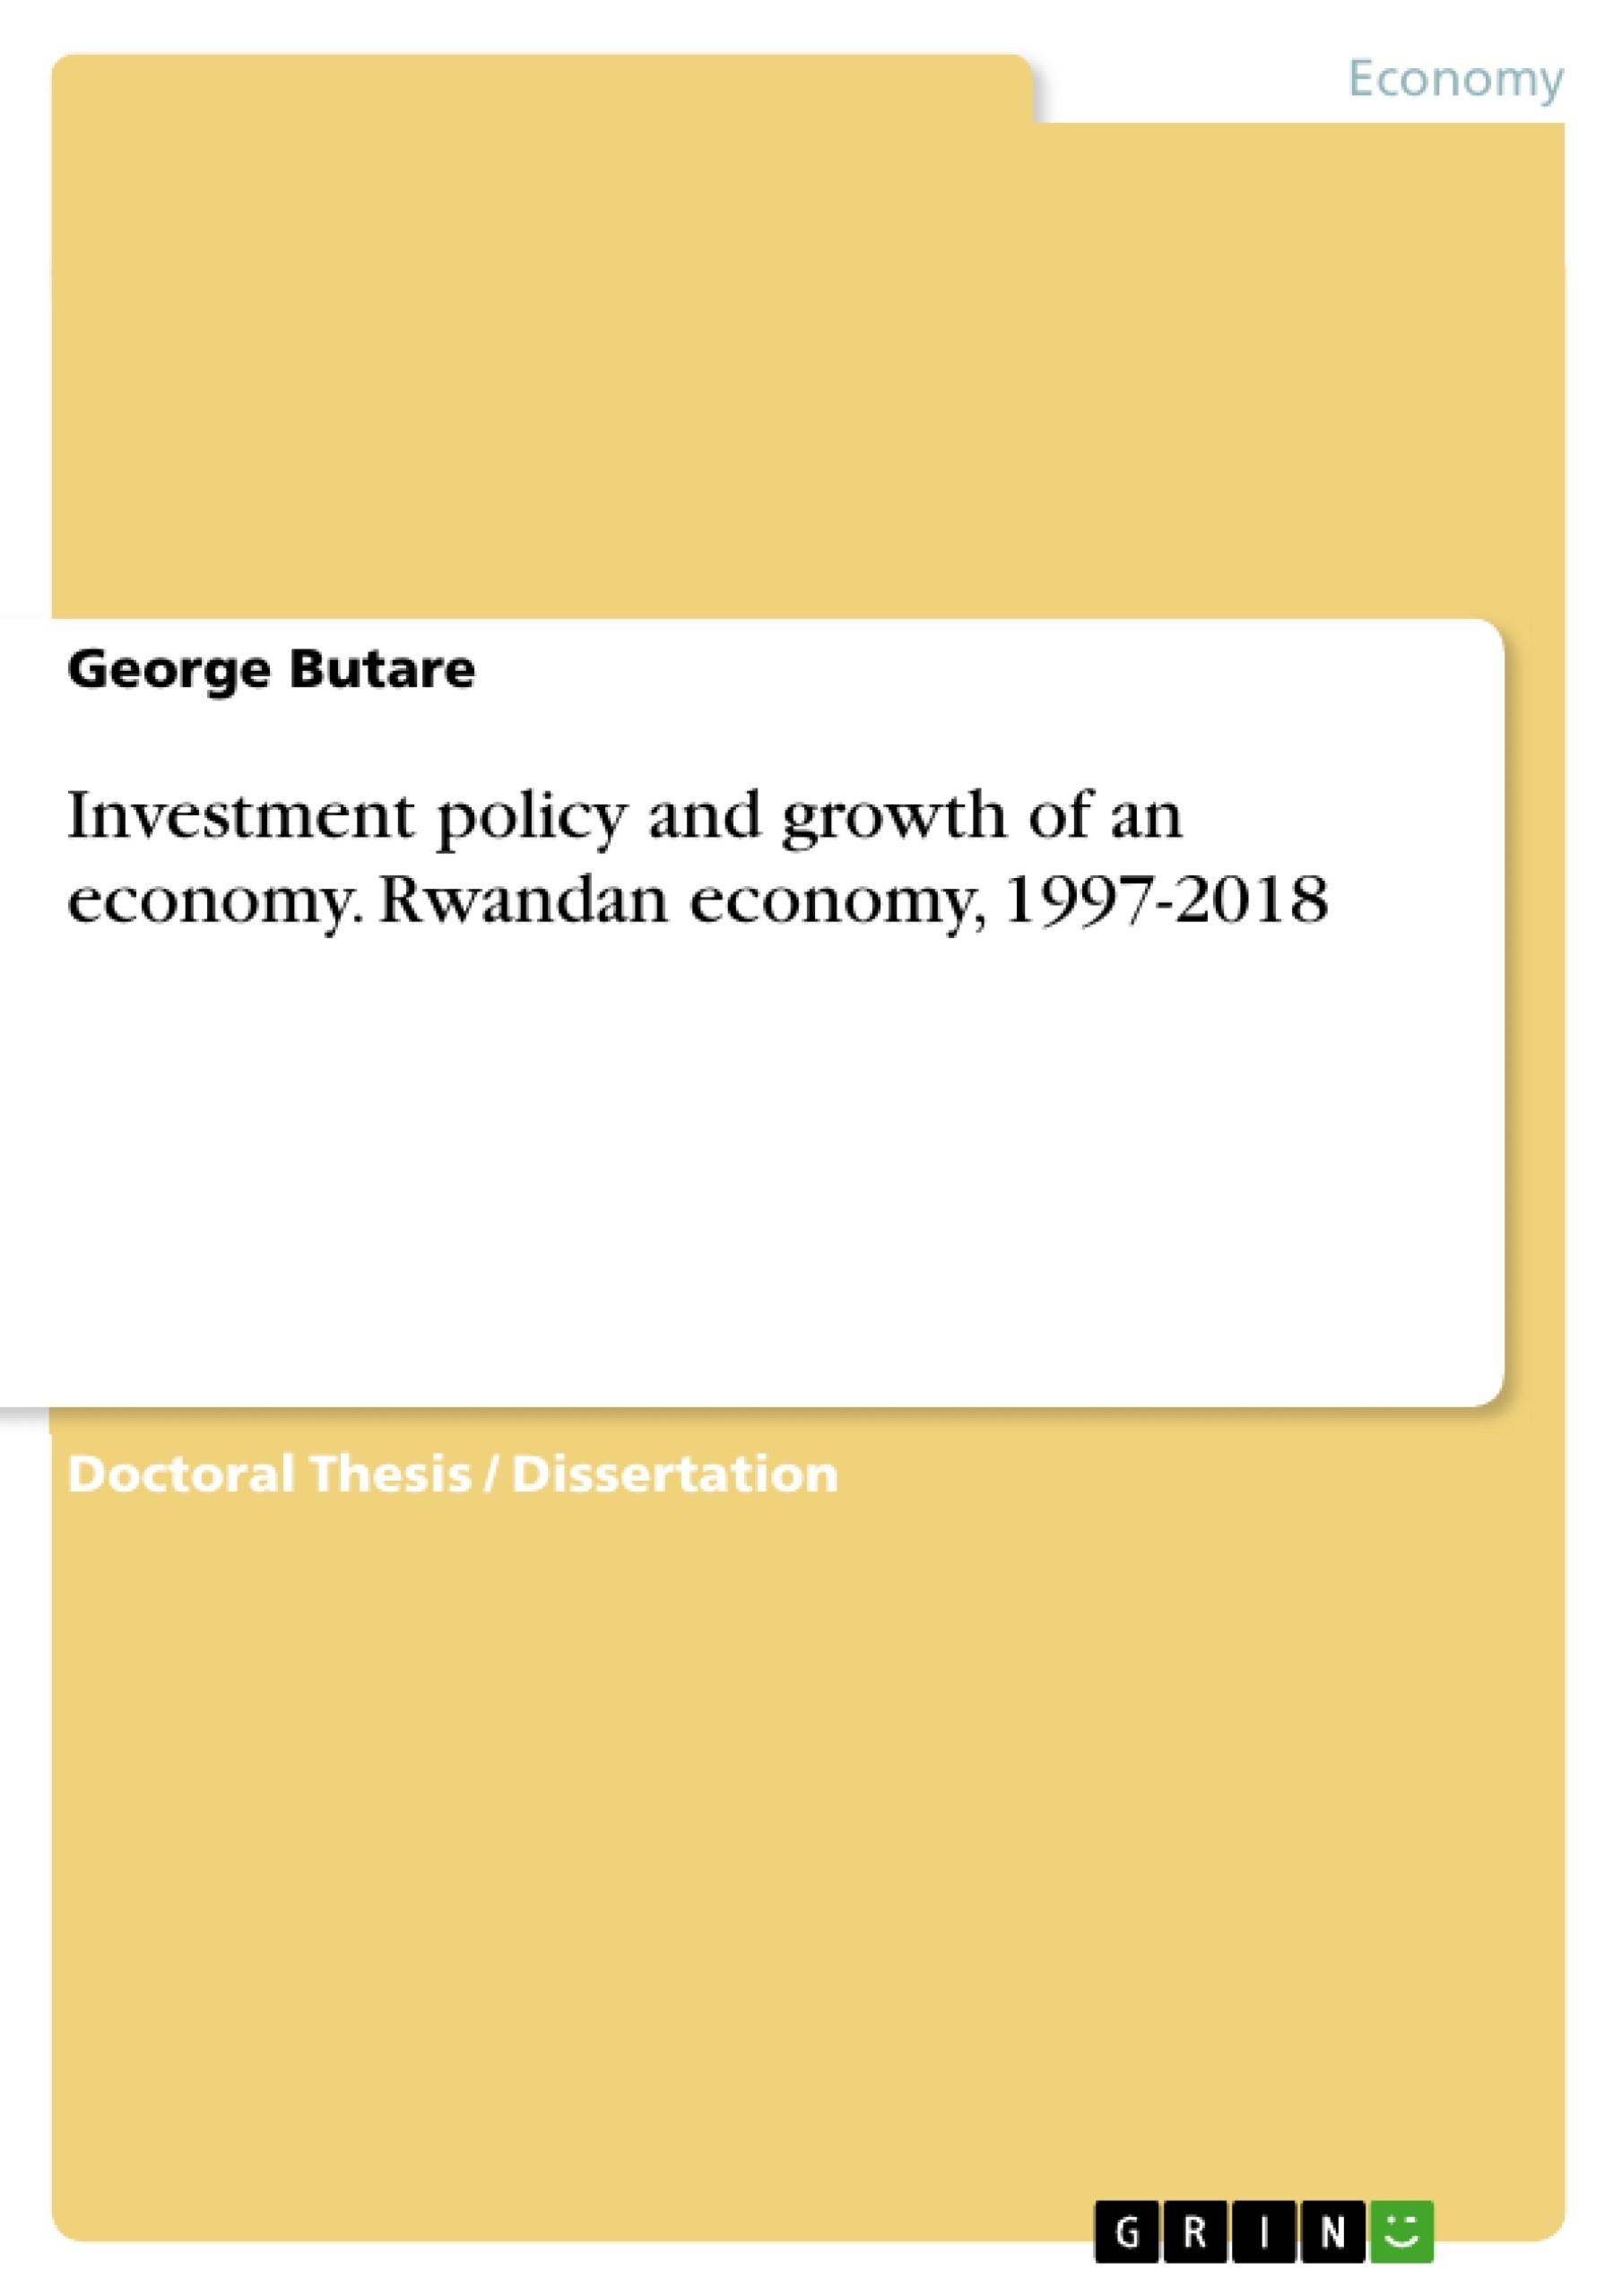 Title: Investment policy and growth of an economy. Rwandan economy, 1997-2018